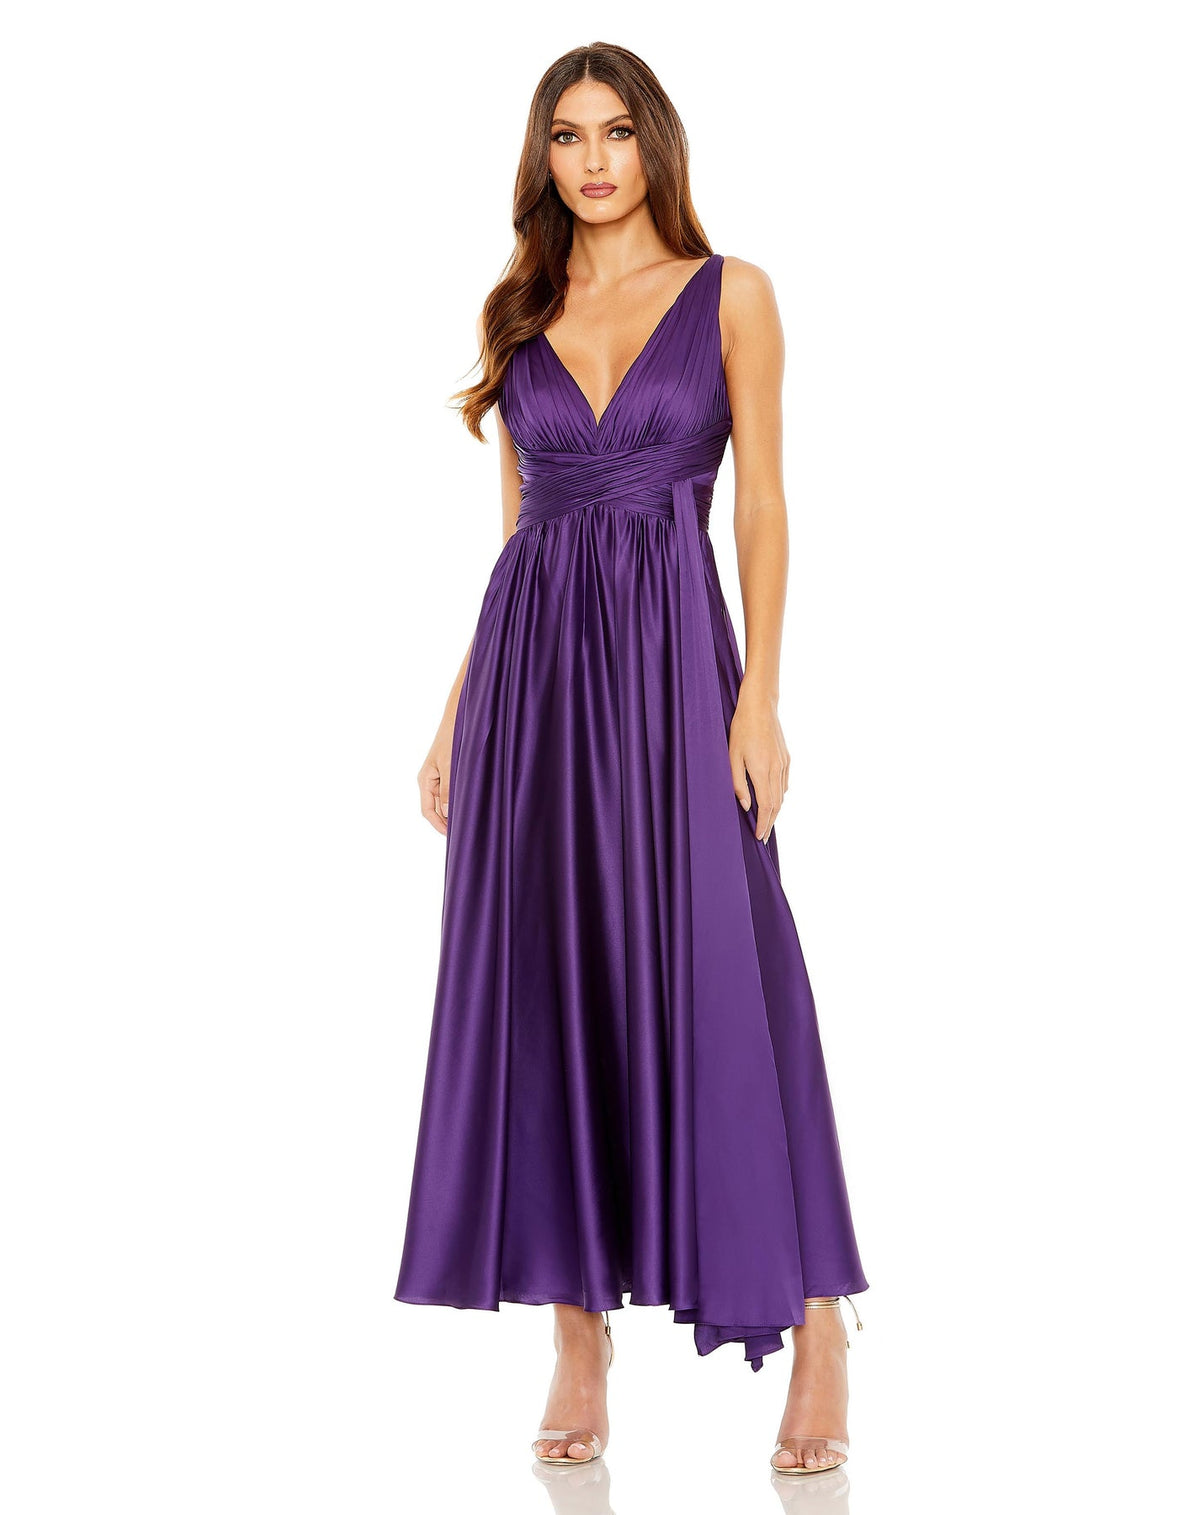 MAC DUGGAL, RUCHED TOP SATIN PLEATED TEA LENGTH DRESS, Style #56035 